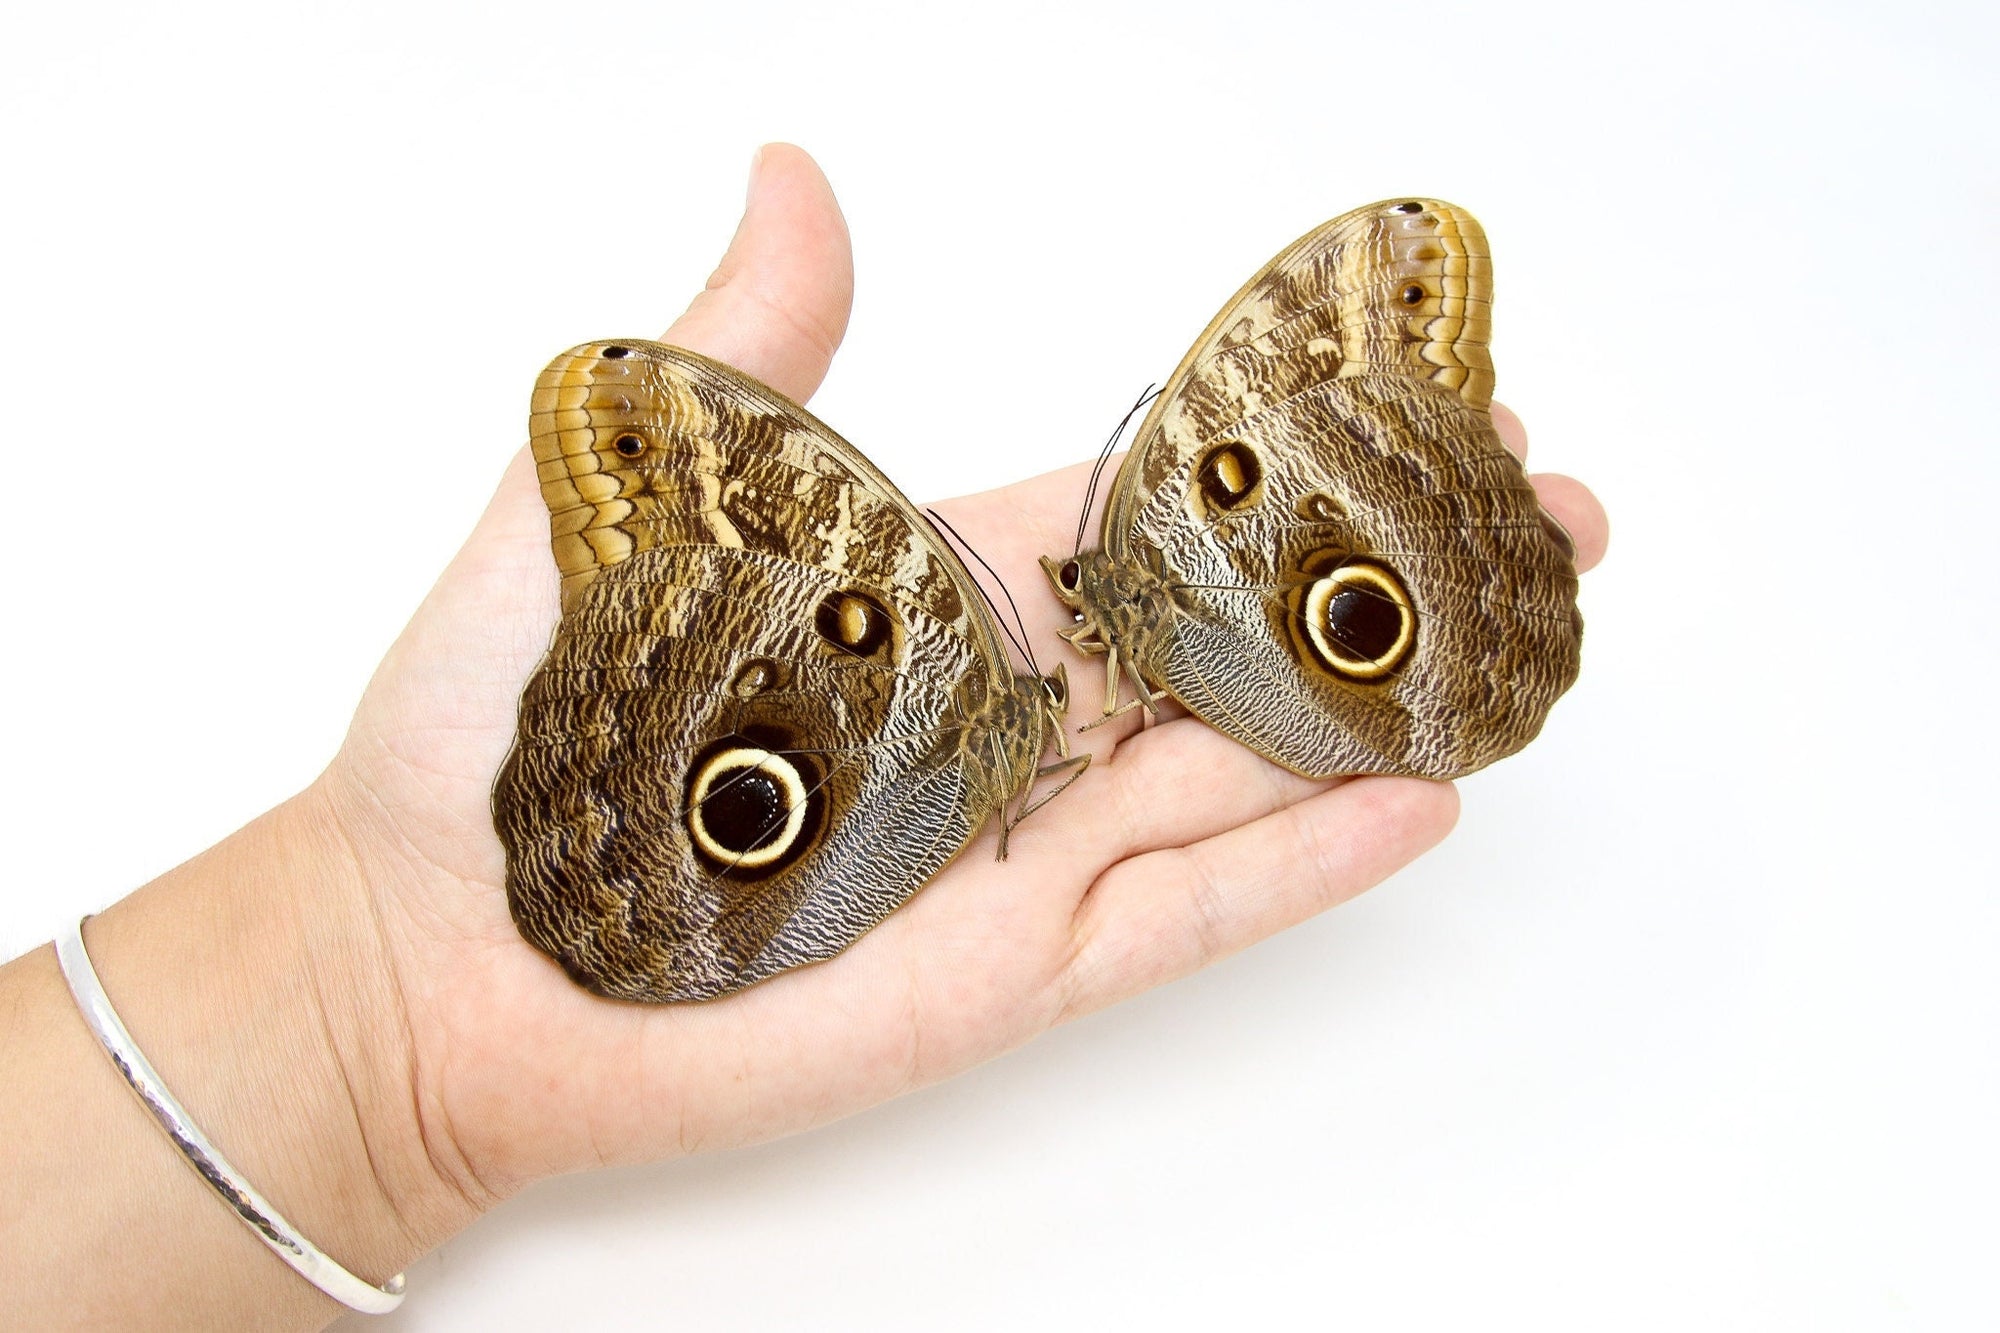 Two (2) Huge! Caligo teucer semicaerulea | GIANT OWL BUTTERFLY, A1 Real Dry-Preserved Butterflies, Unmounted Entomology Taxidermy Specimens